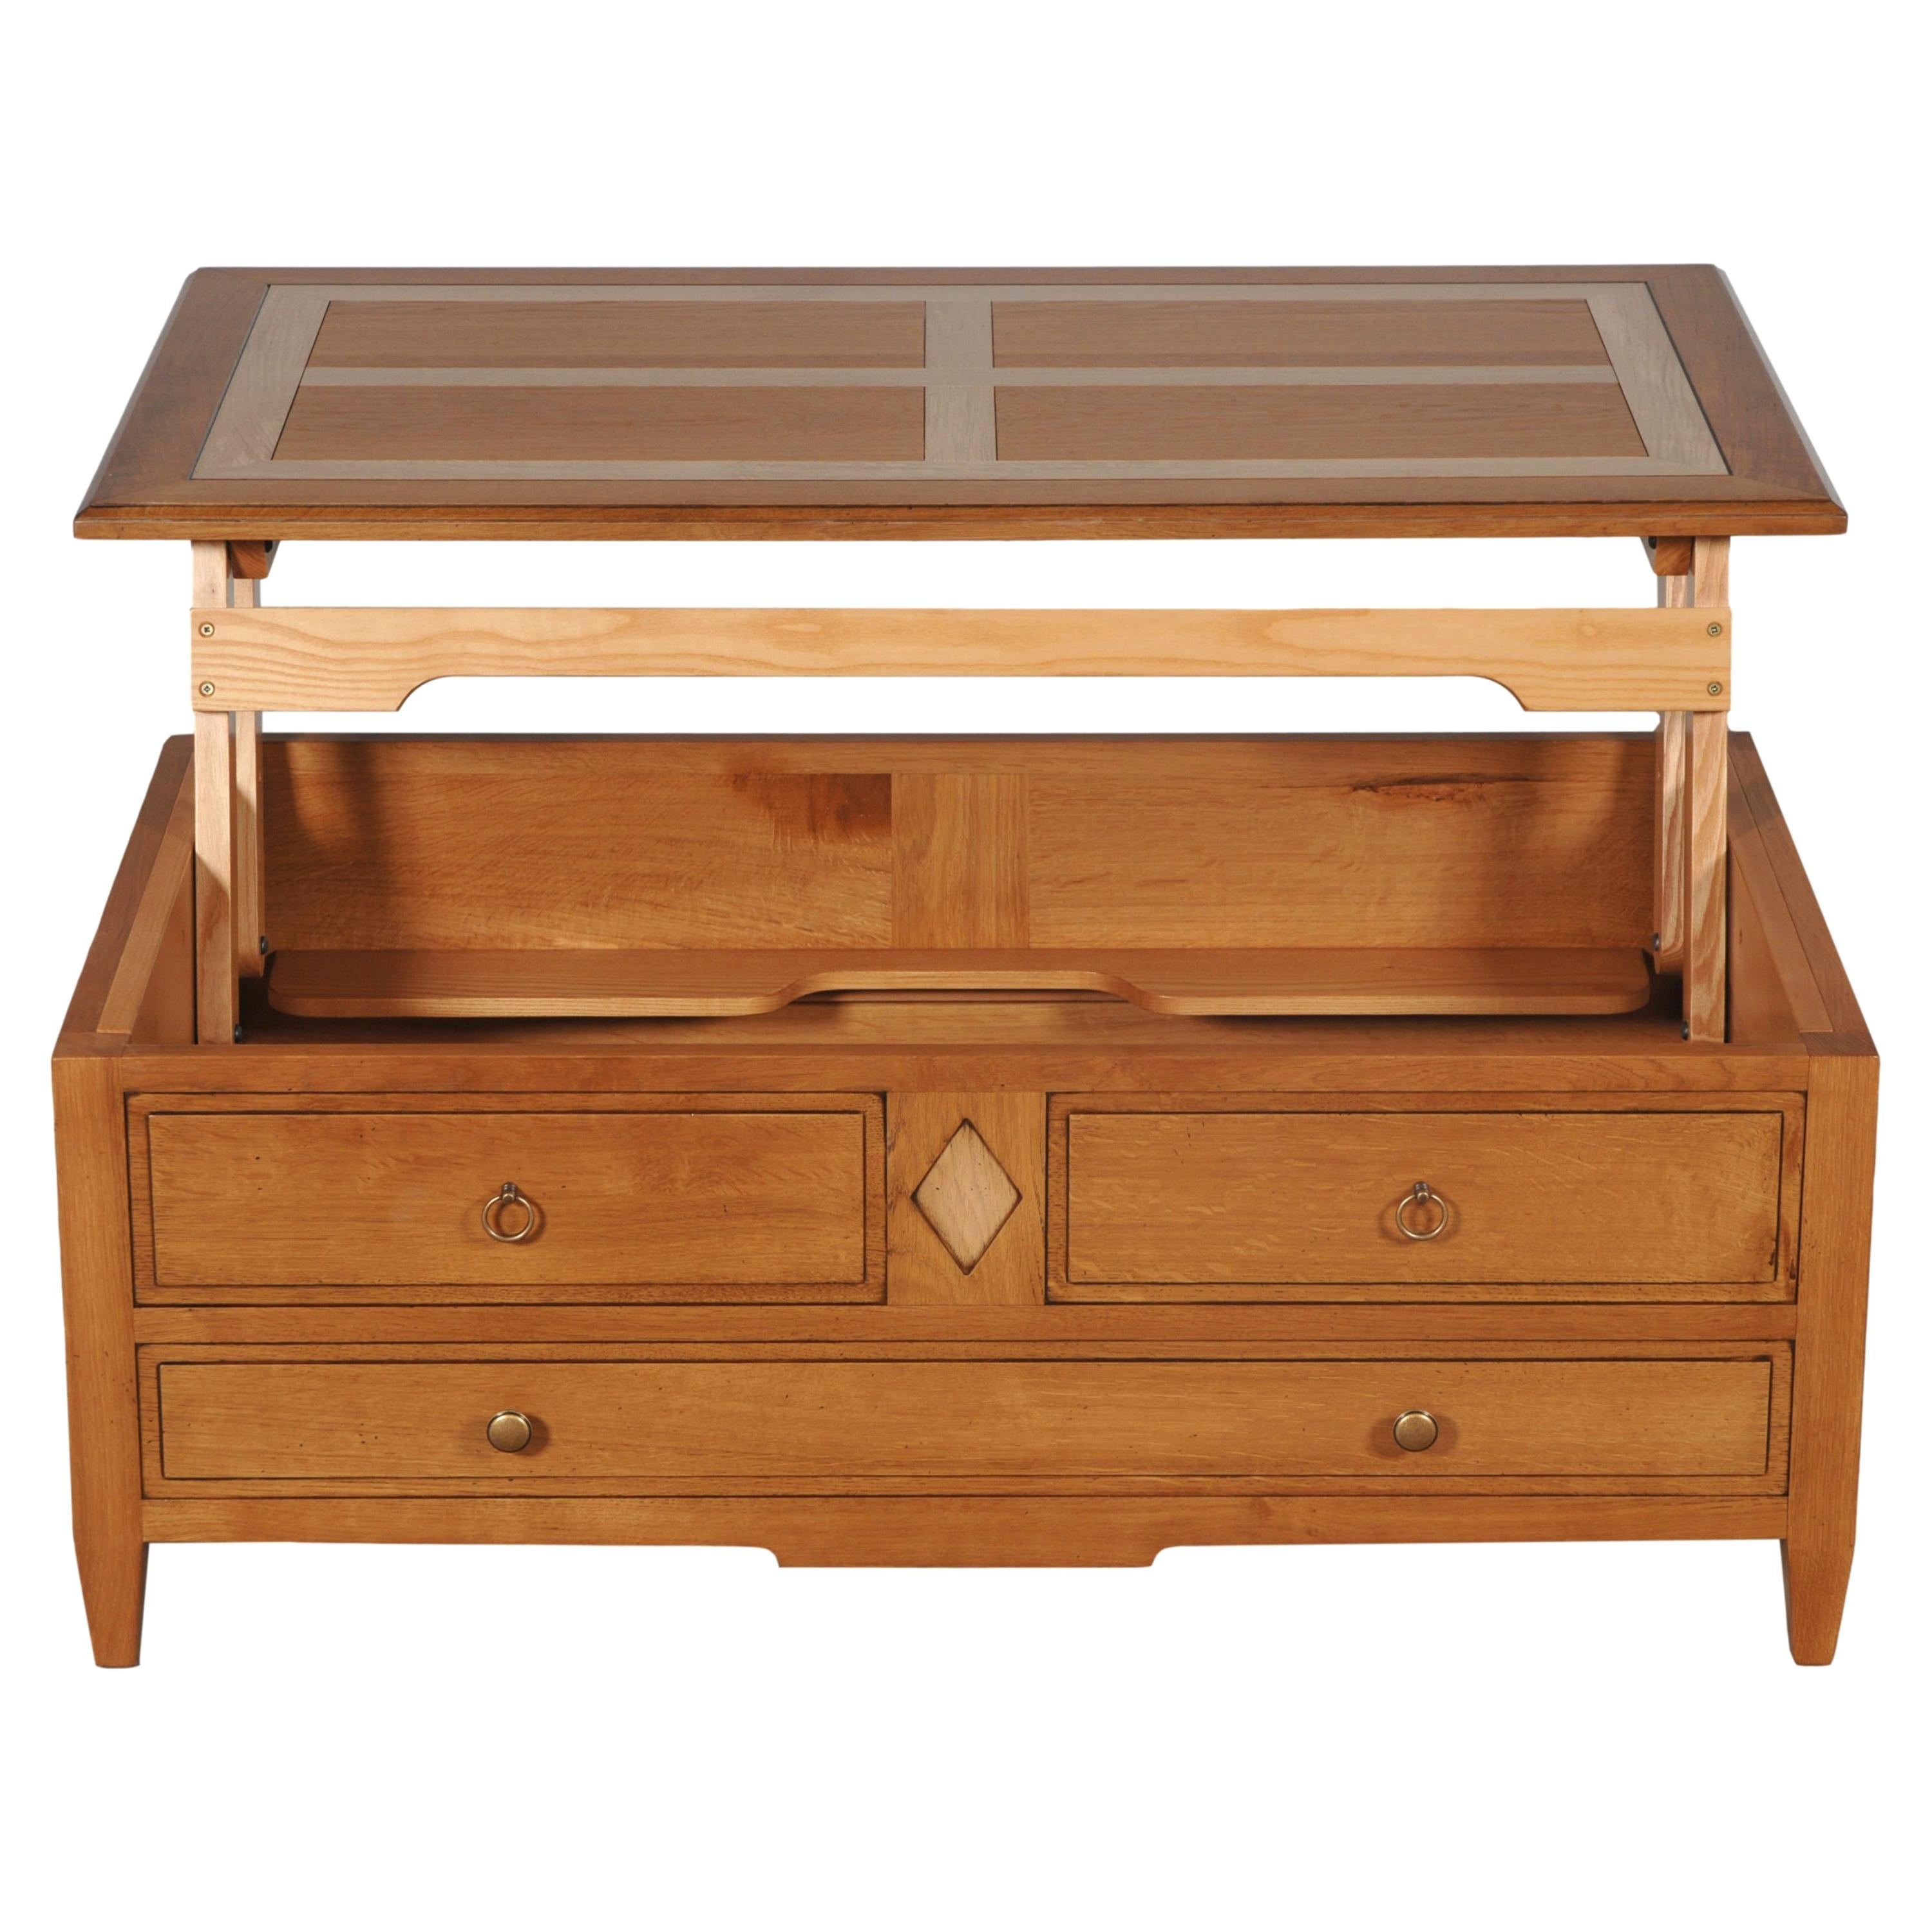 Liftable coffee table for TV diners in solid oak, storage for bottles & glasses For Sale